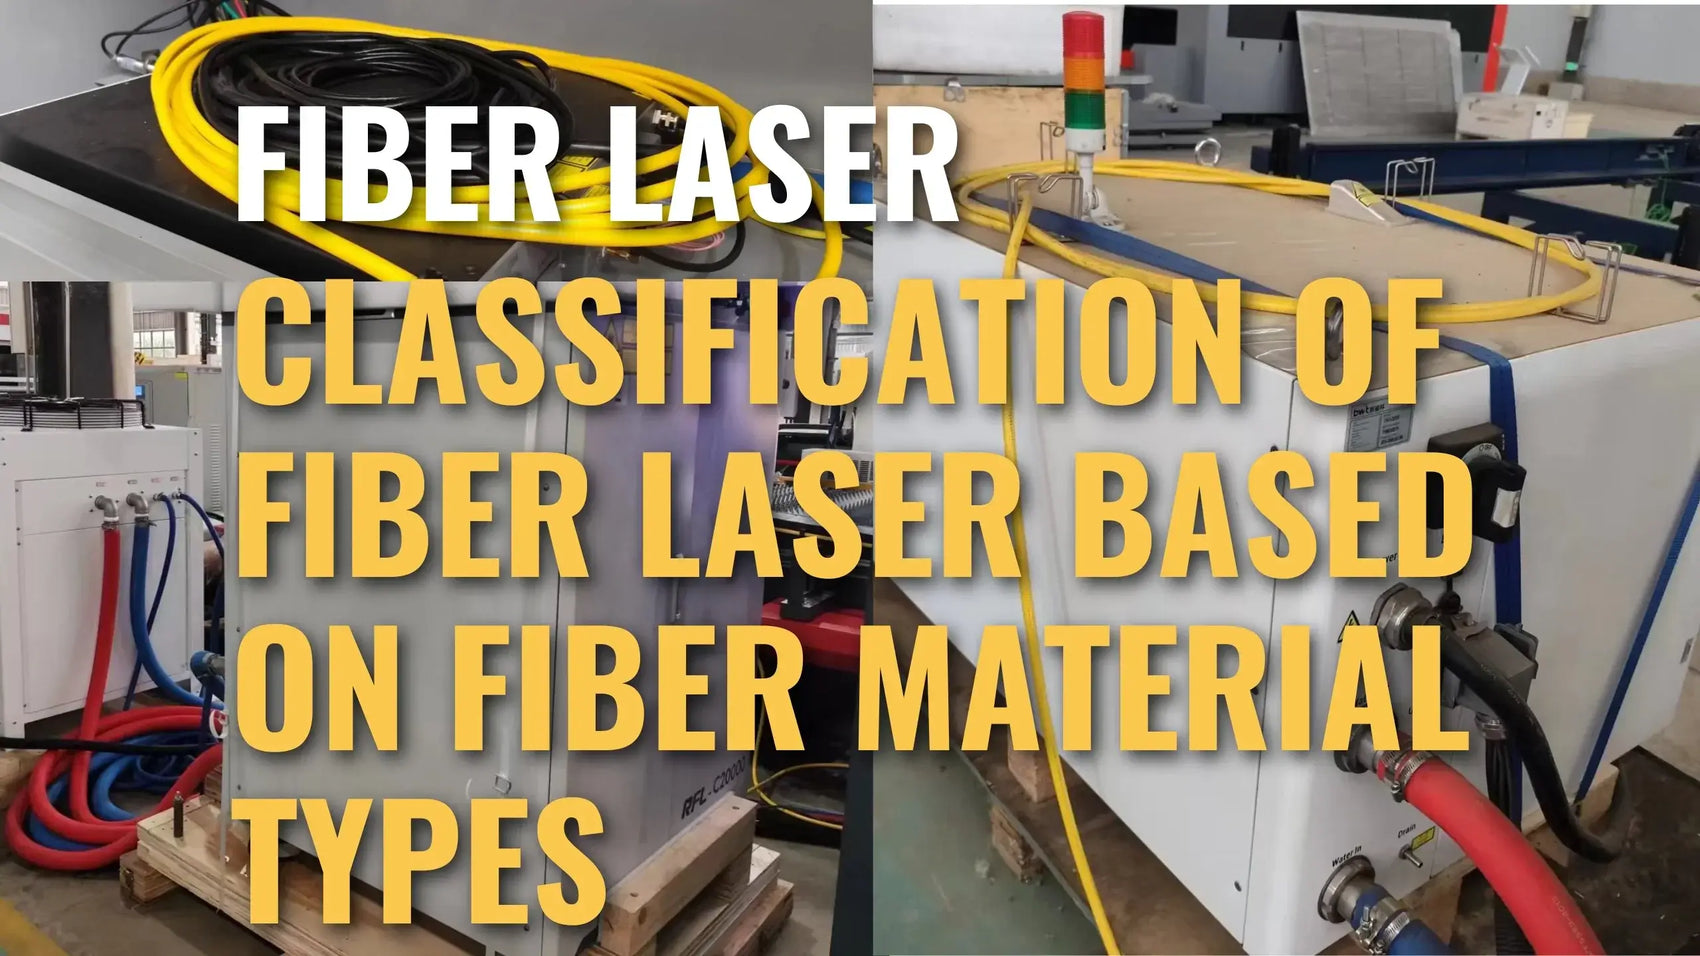 Classification of fiber laser based on fiber material types with various equipment and cables in an industrial setting